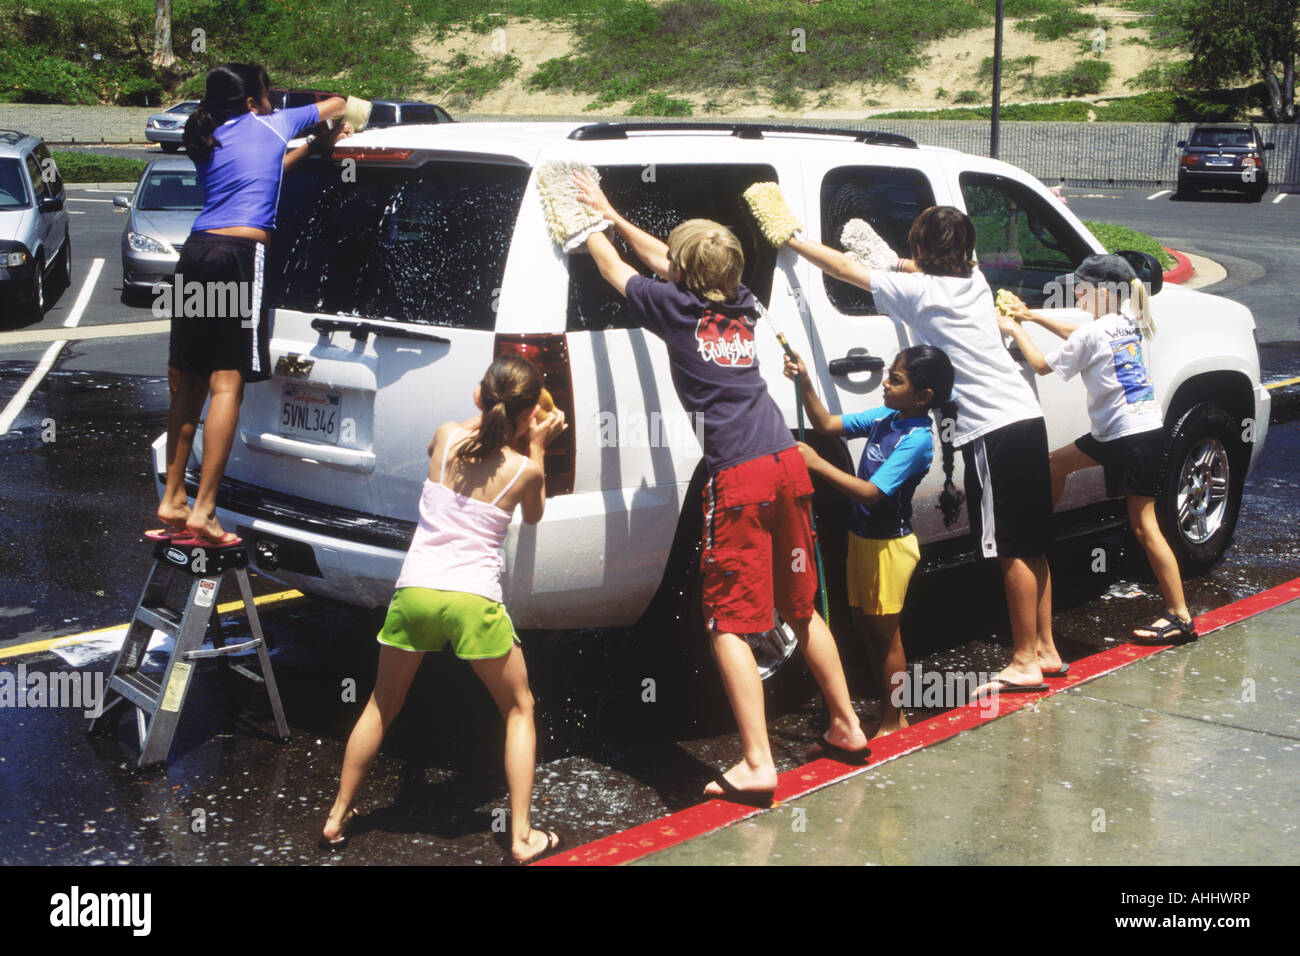 The human car wash with school kids at elementary school in California Stock Photo